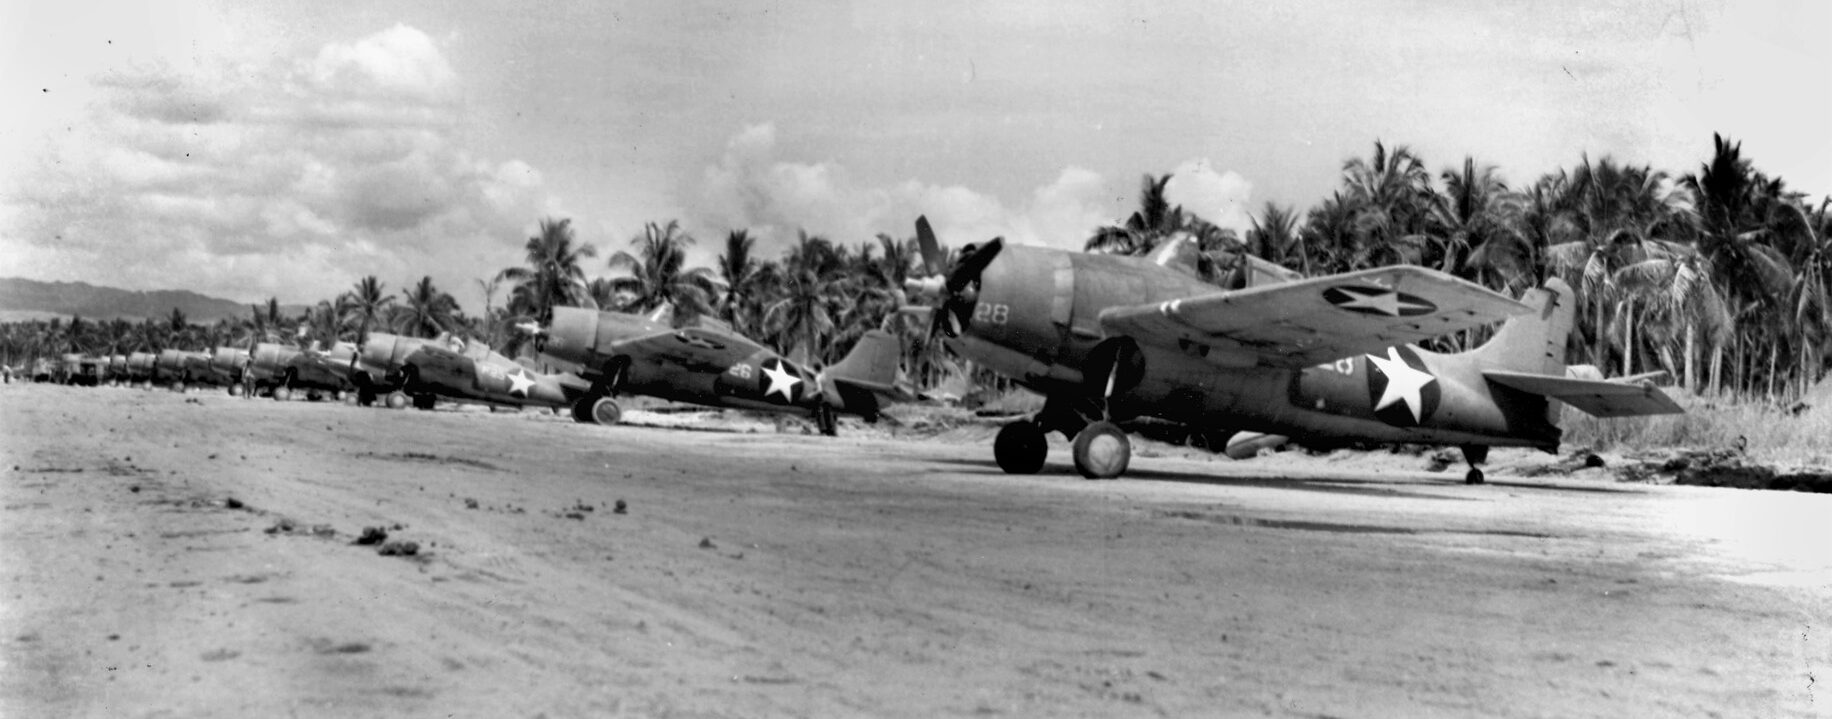 These U.S. Marine Grumman F4F Wildcat fighter planes of the Cactus Air Force fought the Japanese for control of the skies over Guadalcanal. When air superiority was achieved, the fighters and bombers flying from Henderson Field provided vital support to American troops in action on the island. 